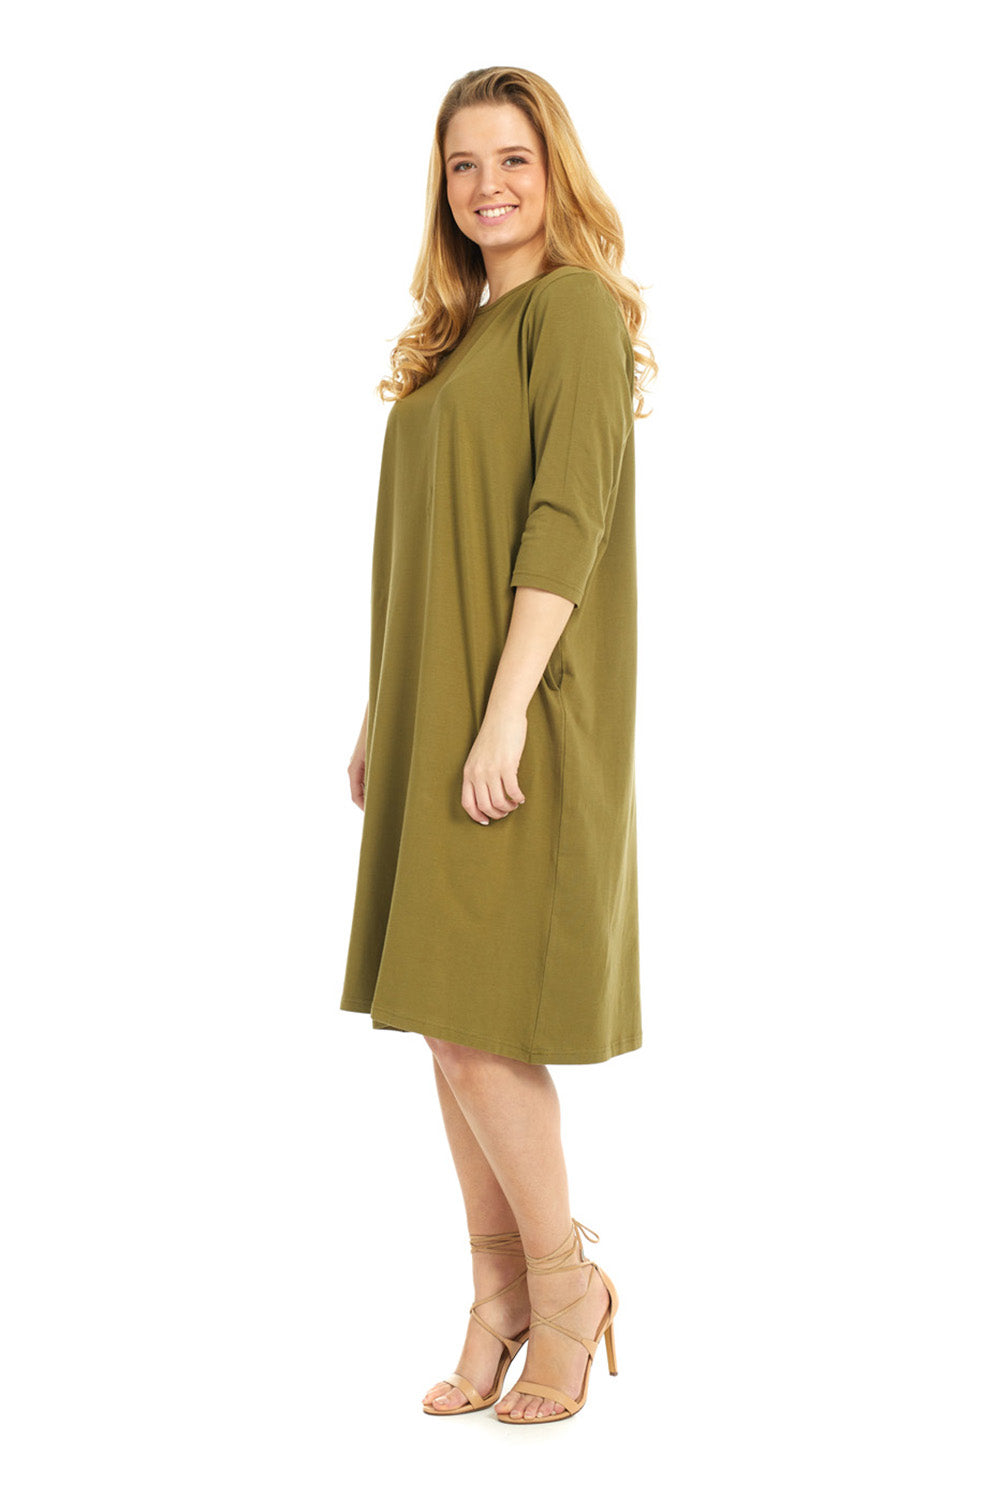 Soft and cozy cotton olive green t-shirt dress with pockets. modest 3/4 sleeves and knee length